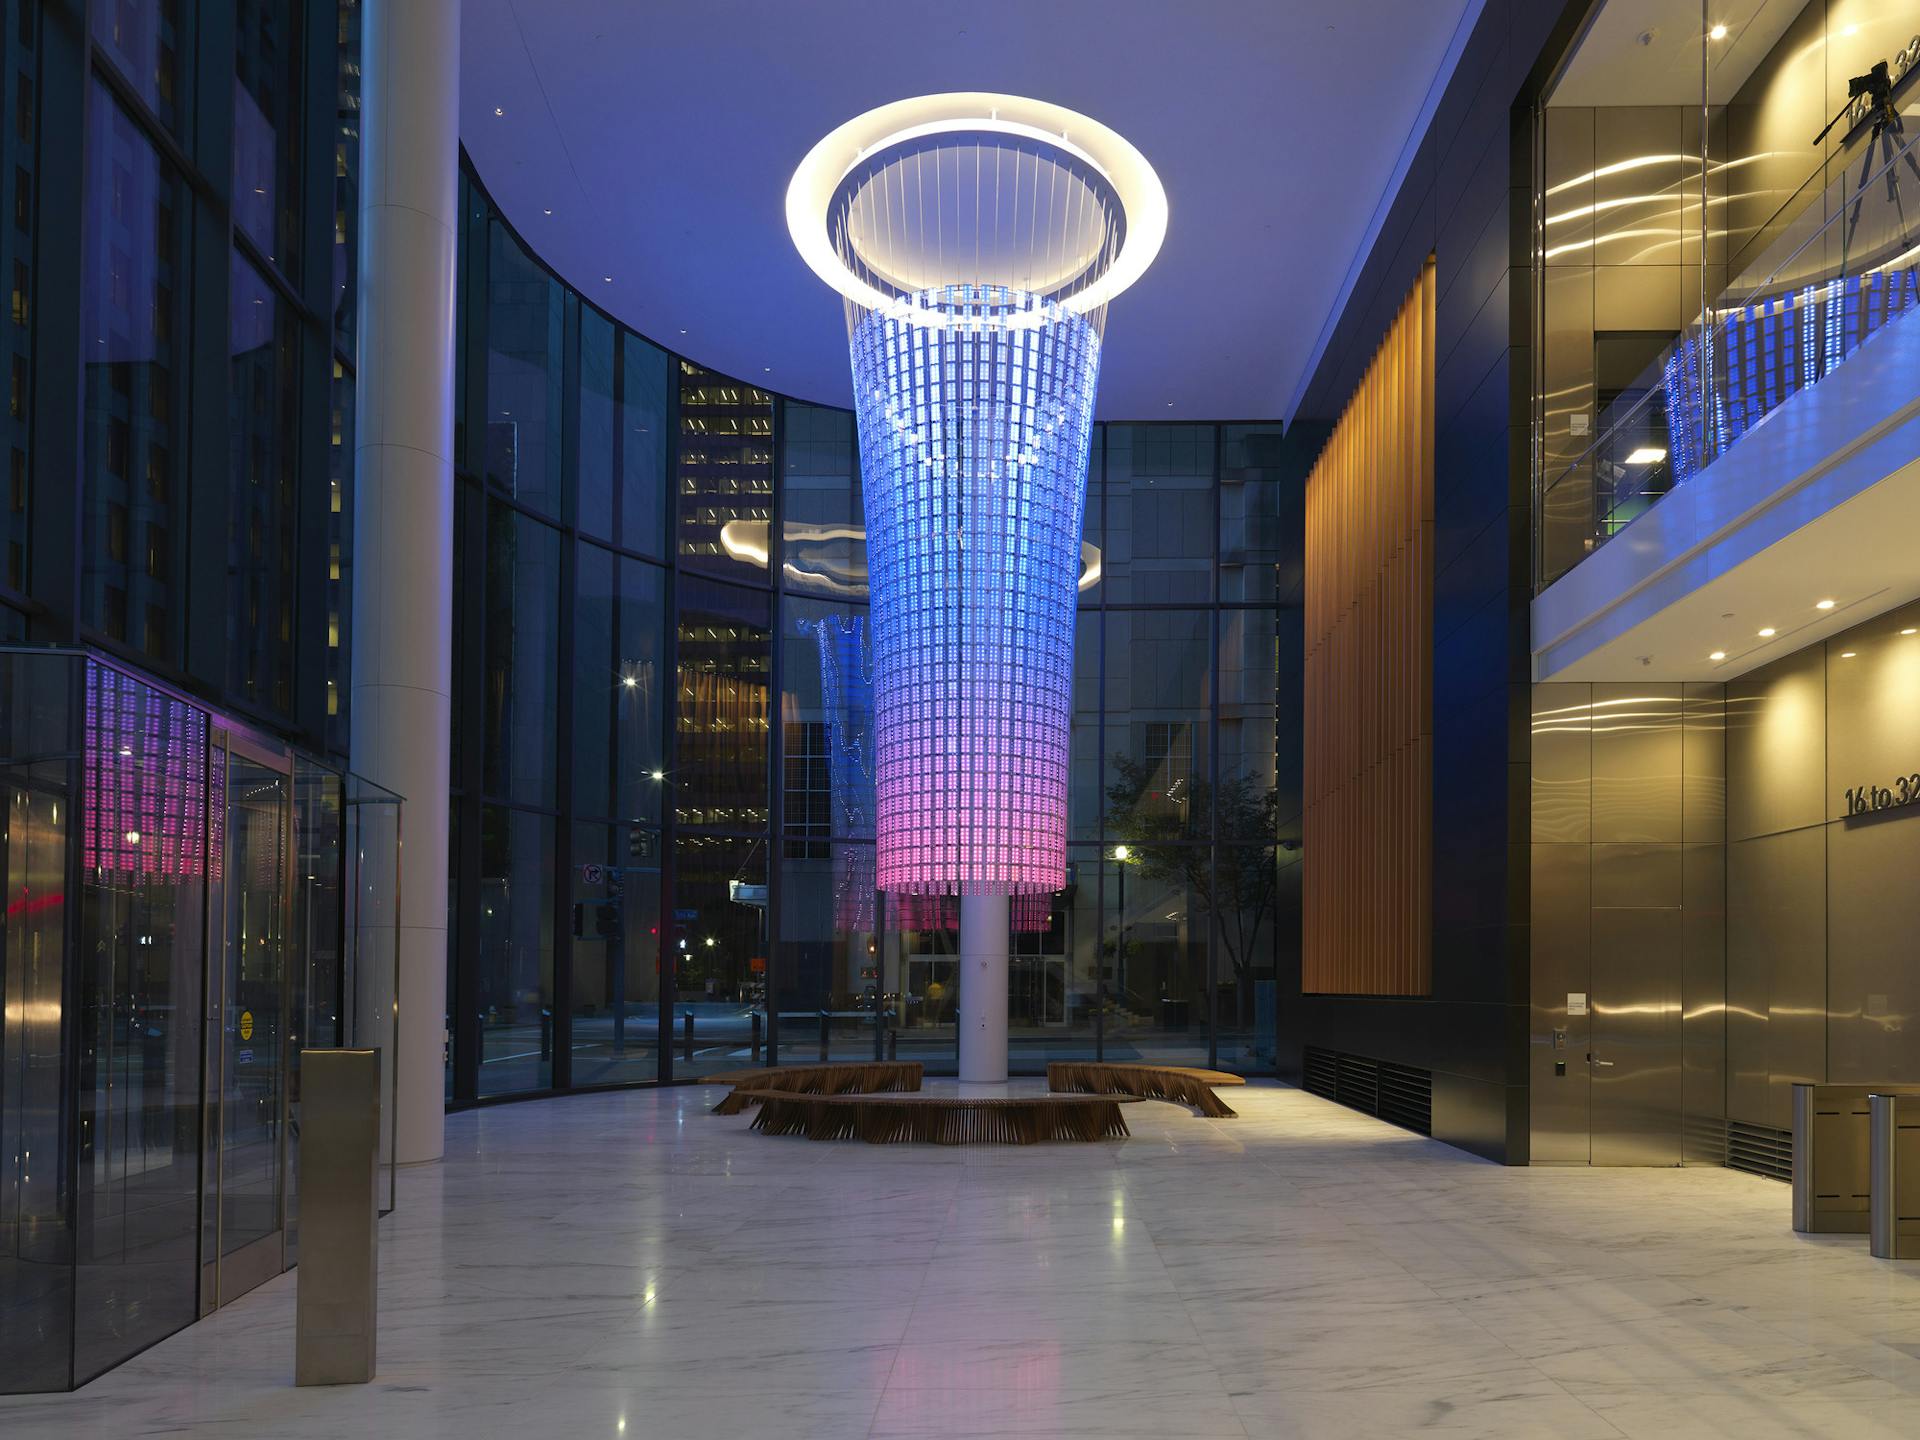 ESI Design's Beacon at PNC Tower, Pittsburgh, PA USA

andy ryan, andyryan, architecture, art, atrium, electronic, esi, esi design, innovation, led, pittsburgh, pnc, pnc bank, sculpture, green building, Beacon

